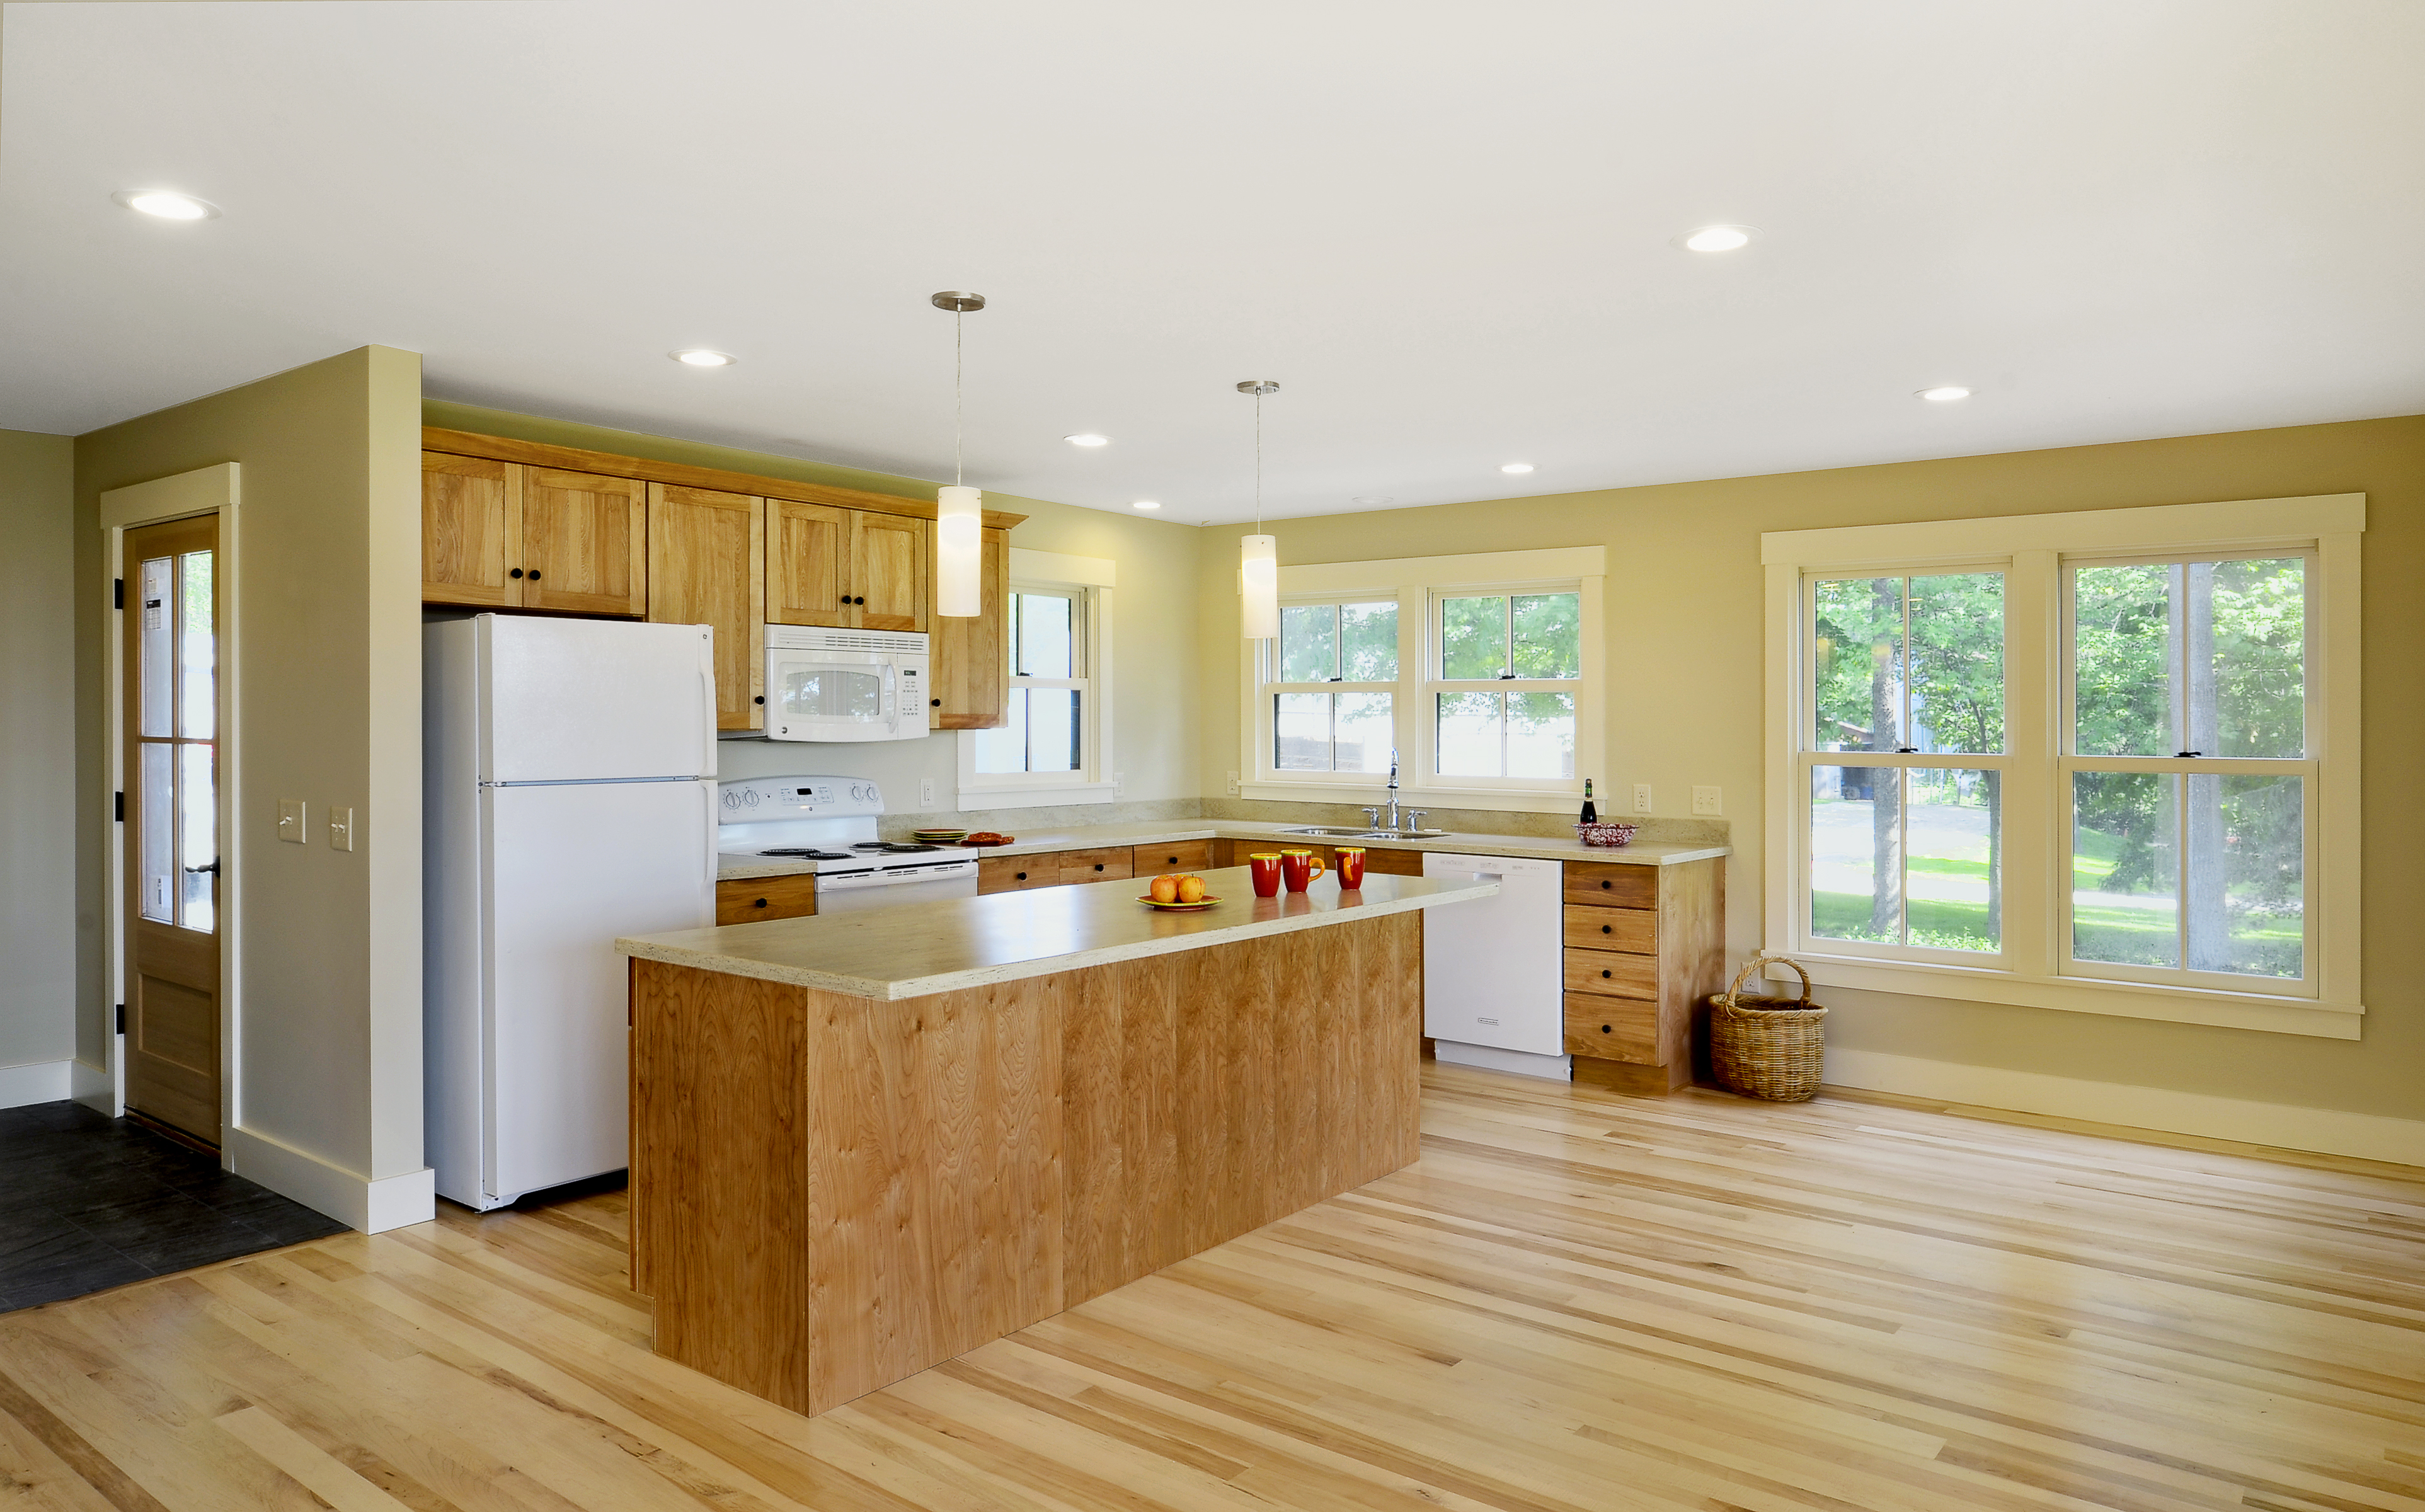 vermont natural coatings floor finish at shelburne farms 